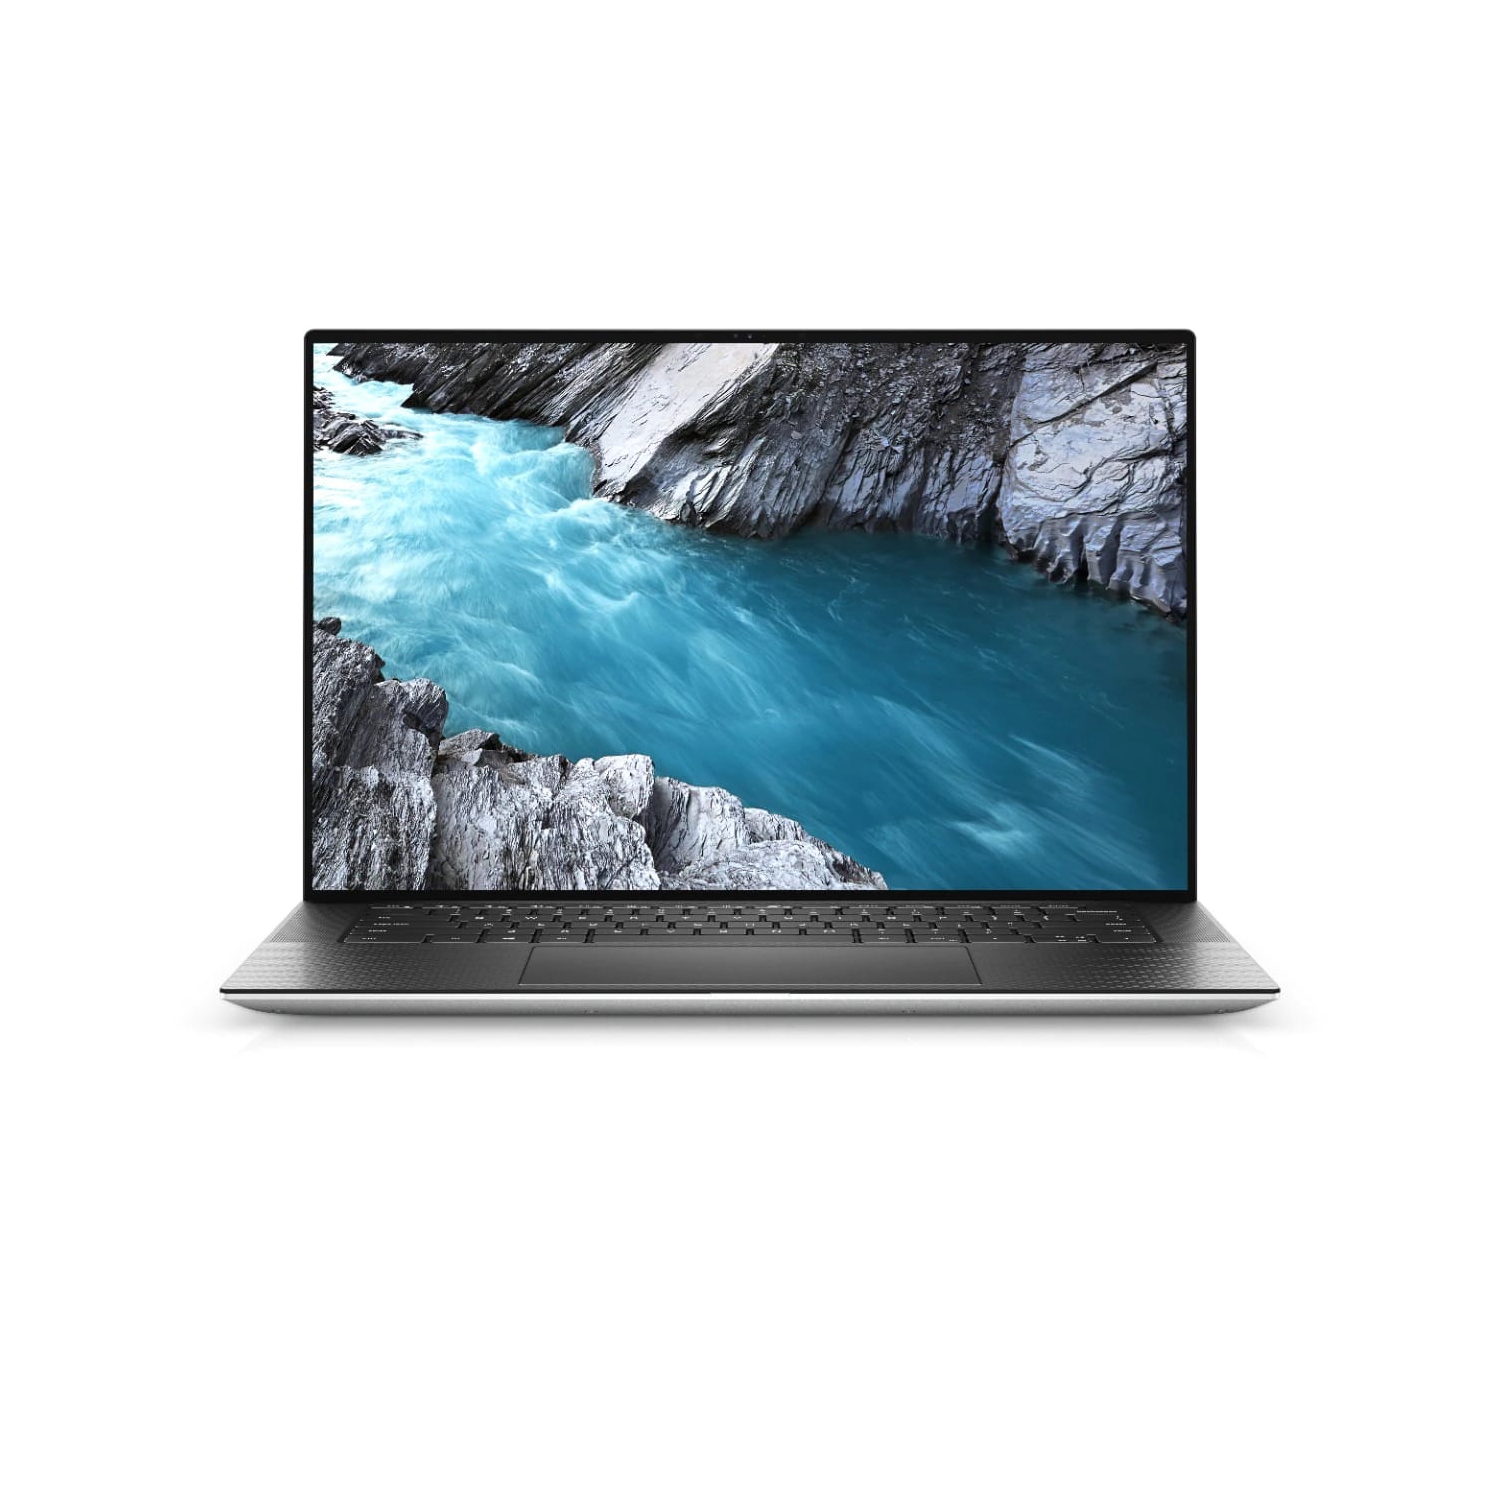 Refurbished (Excellent) - 2020 Dell XPS 9500 Laptop 15" - Intel Core i7-10750H 5Ghz - 512GB SSD - 16GB RAM - GeForce GTX 1650 Ti - 4k Touchscreen - Win 10 Pro - Silver